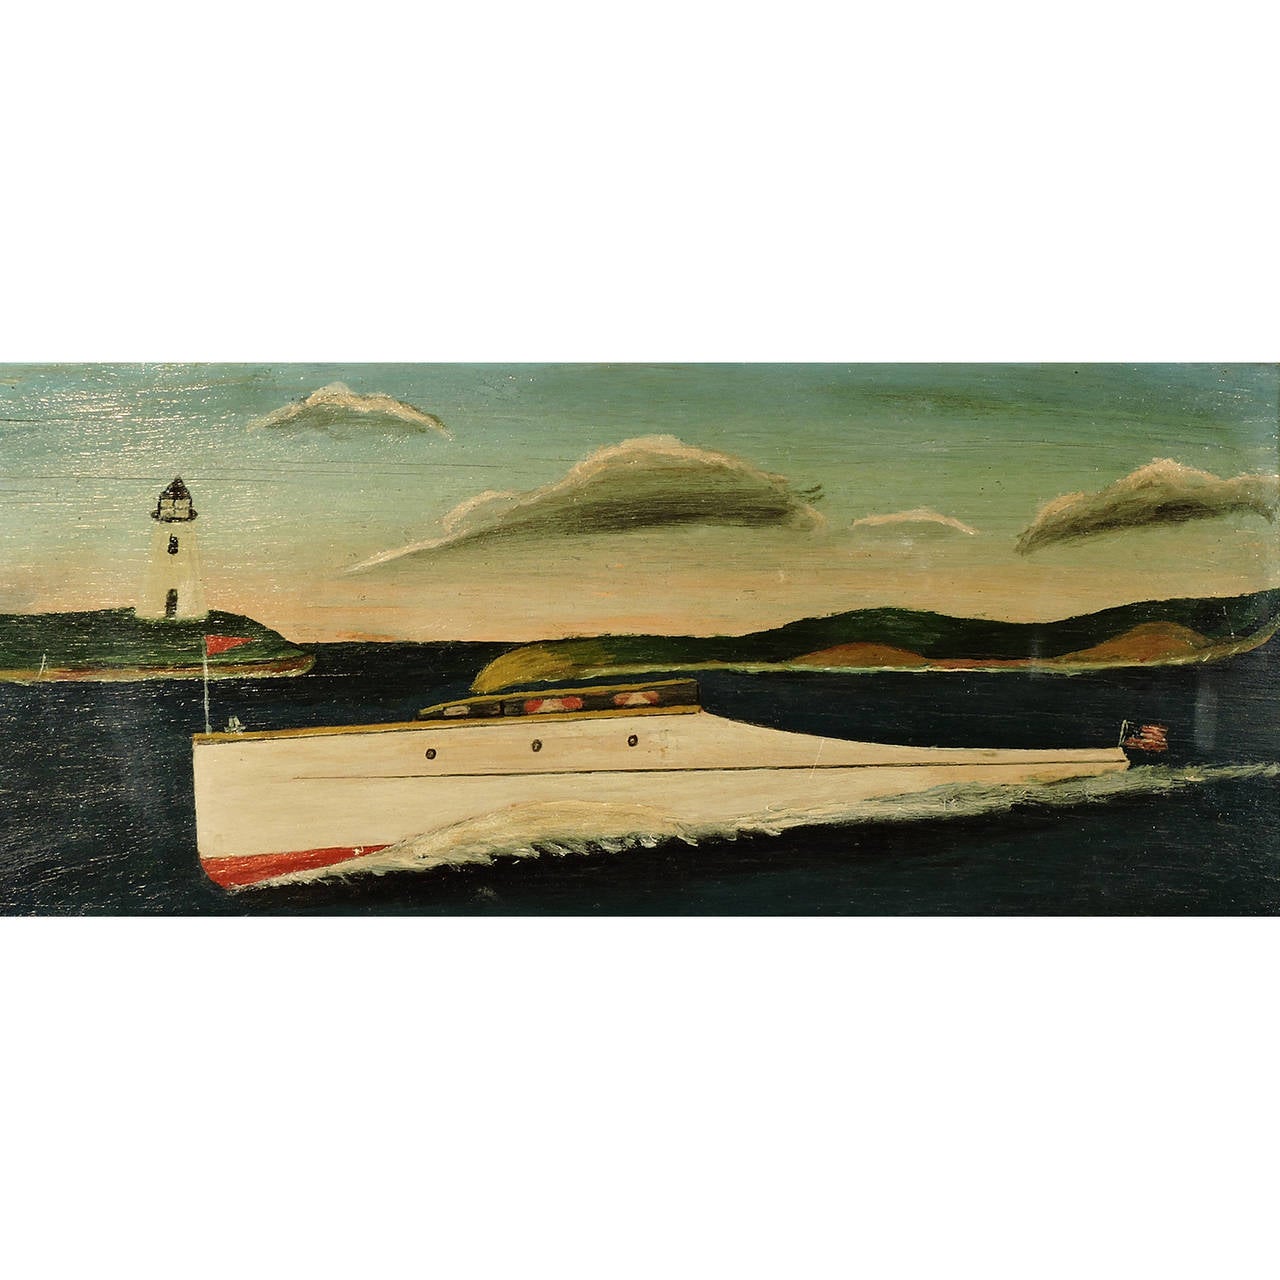 American school (early 20th century)
Folk Art painting of a boat speeding by a Lighthouse
Oil on panel, unsigned. 
Dimensions: 8 x 17.5 inches.